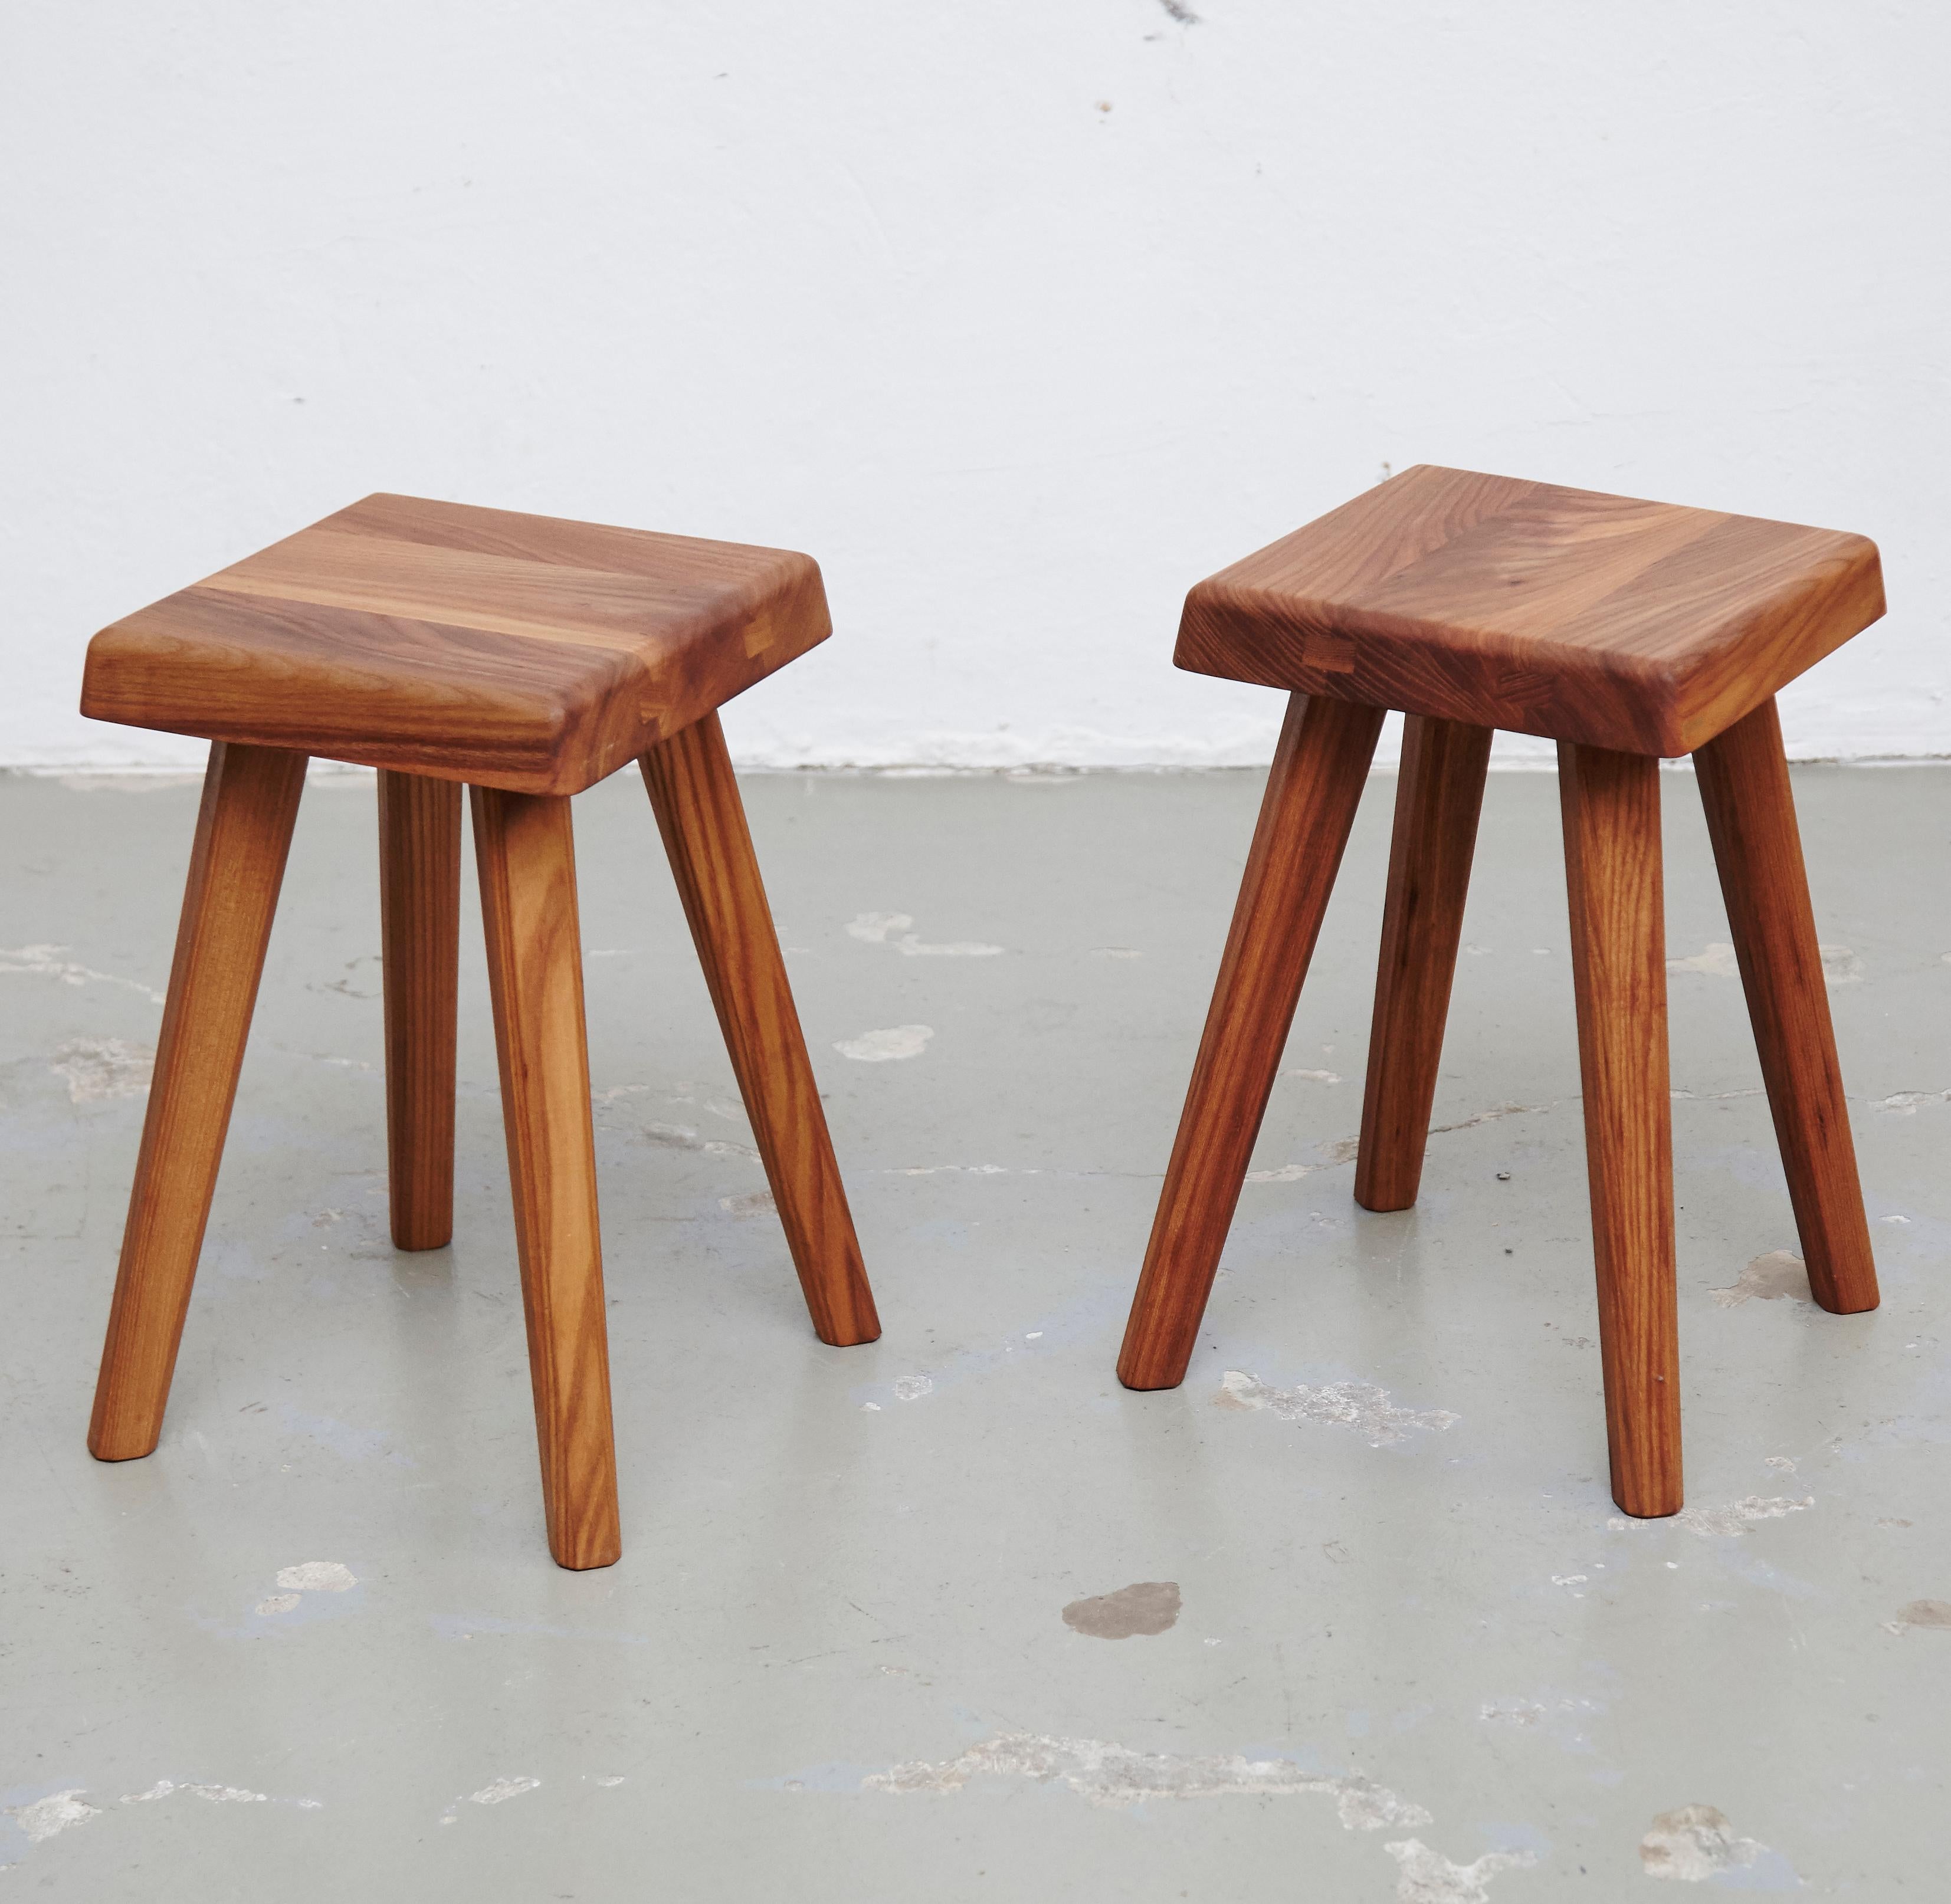 Stools designed by Pierre Chapo, 

Manufactured by Chapo Creations in France, 2018.

Solid elmwood.

In good original condition, with minor wear consistent with age and use, preserving a beautiful patina.

Pierre Chapo is born in a family of